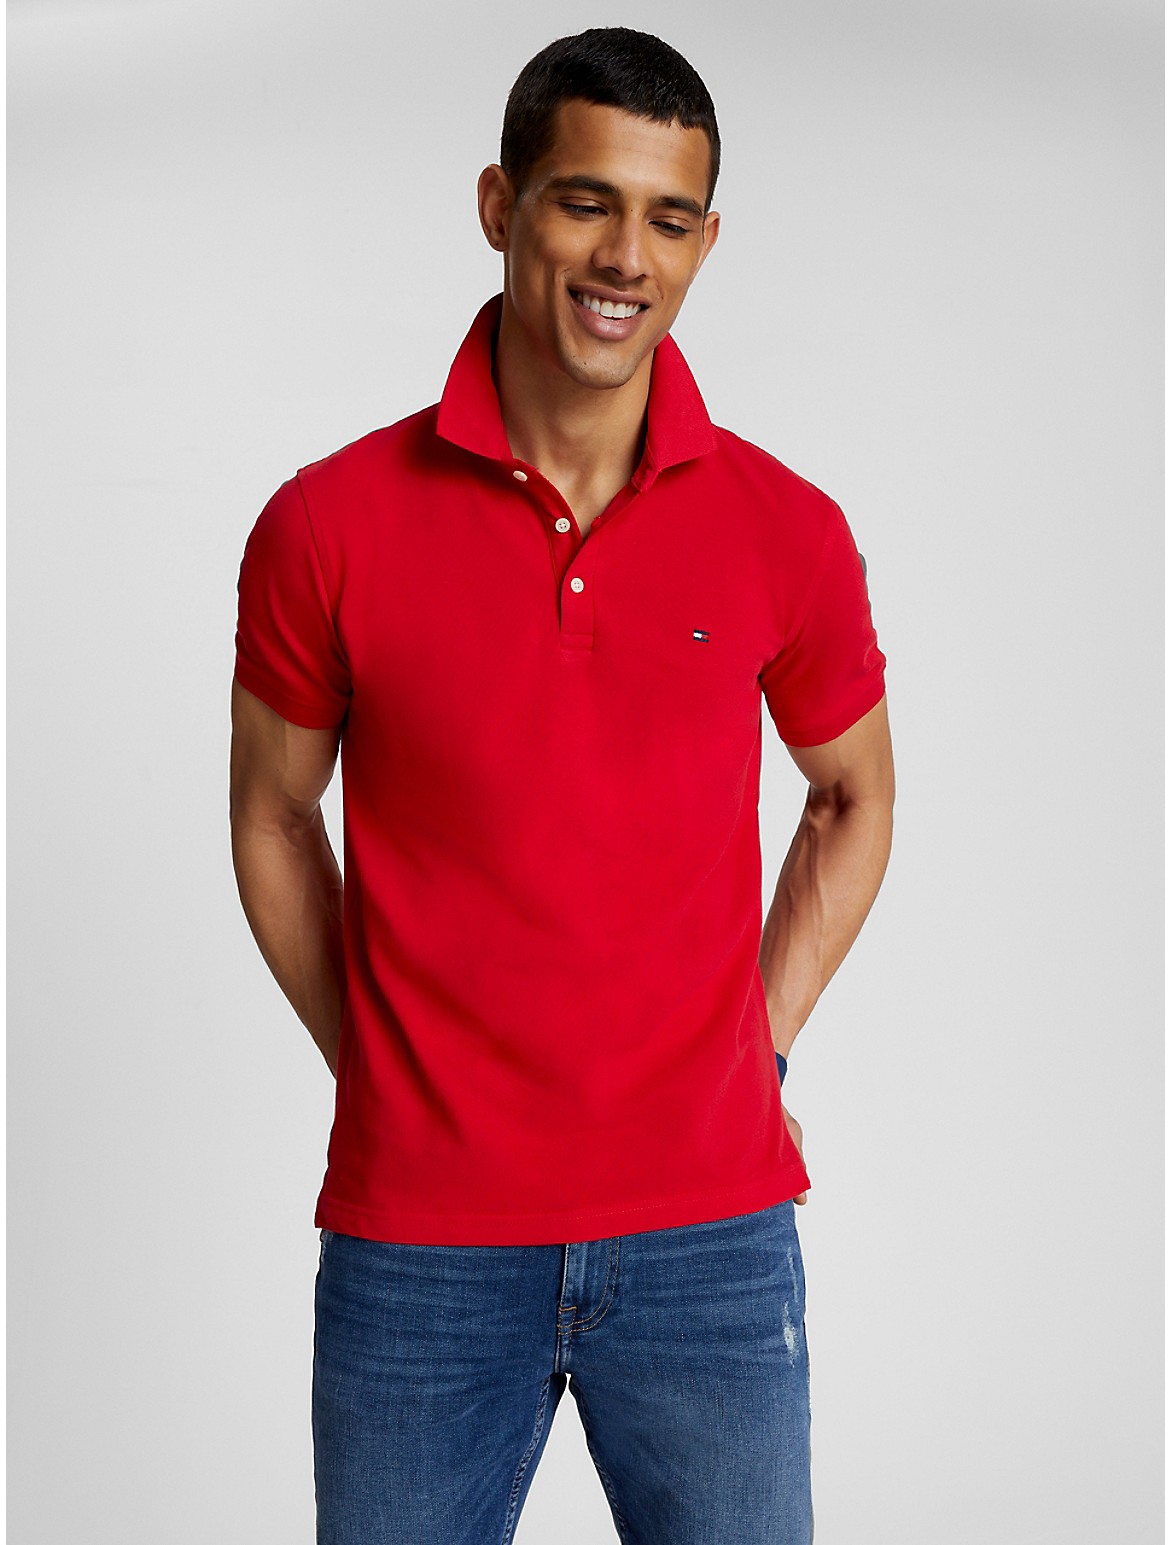 Tommy Hilfiger Men's Slim Fit Tommy Polo - Red - XL